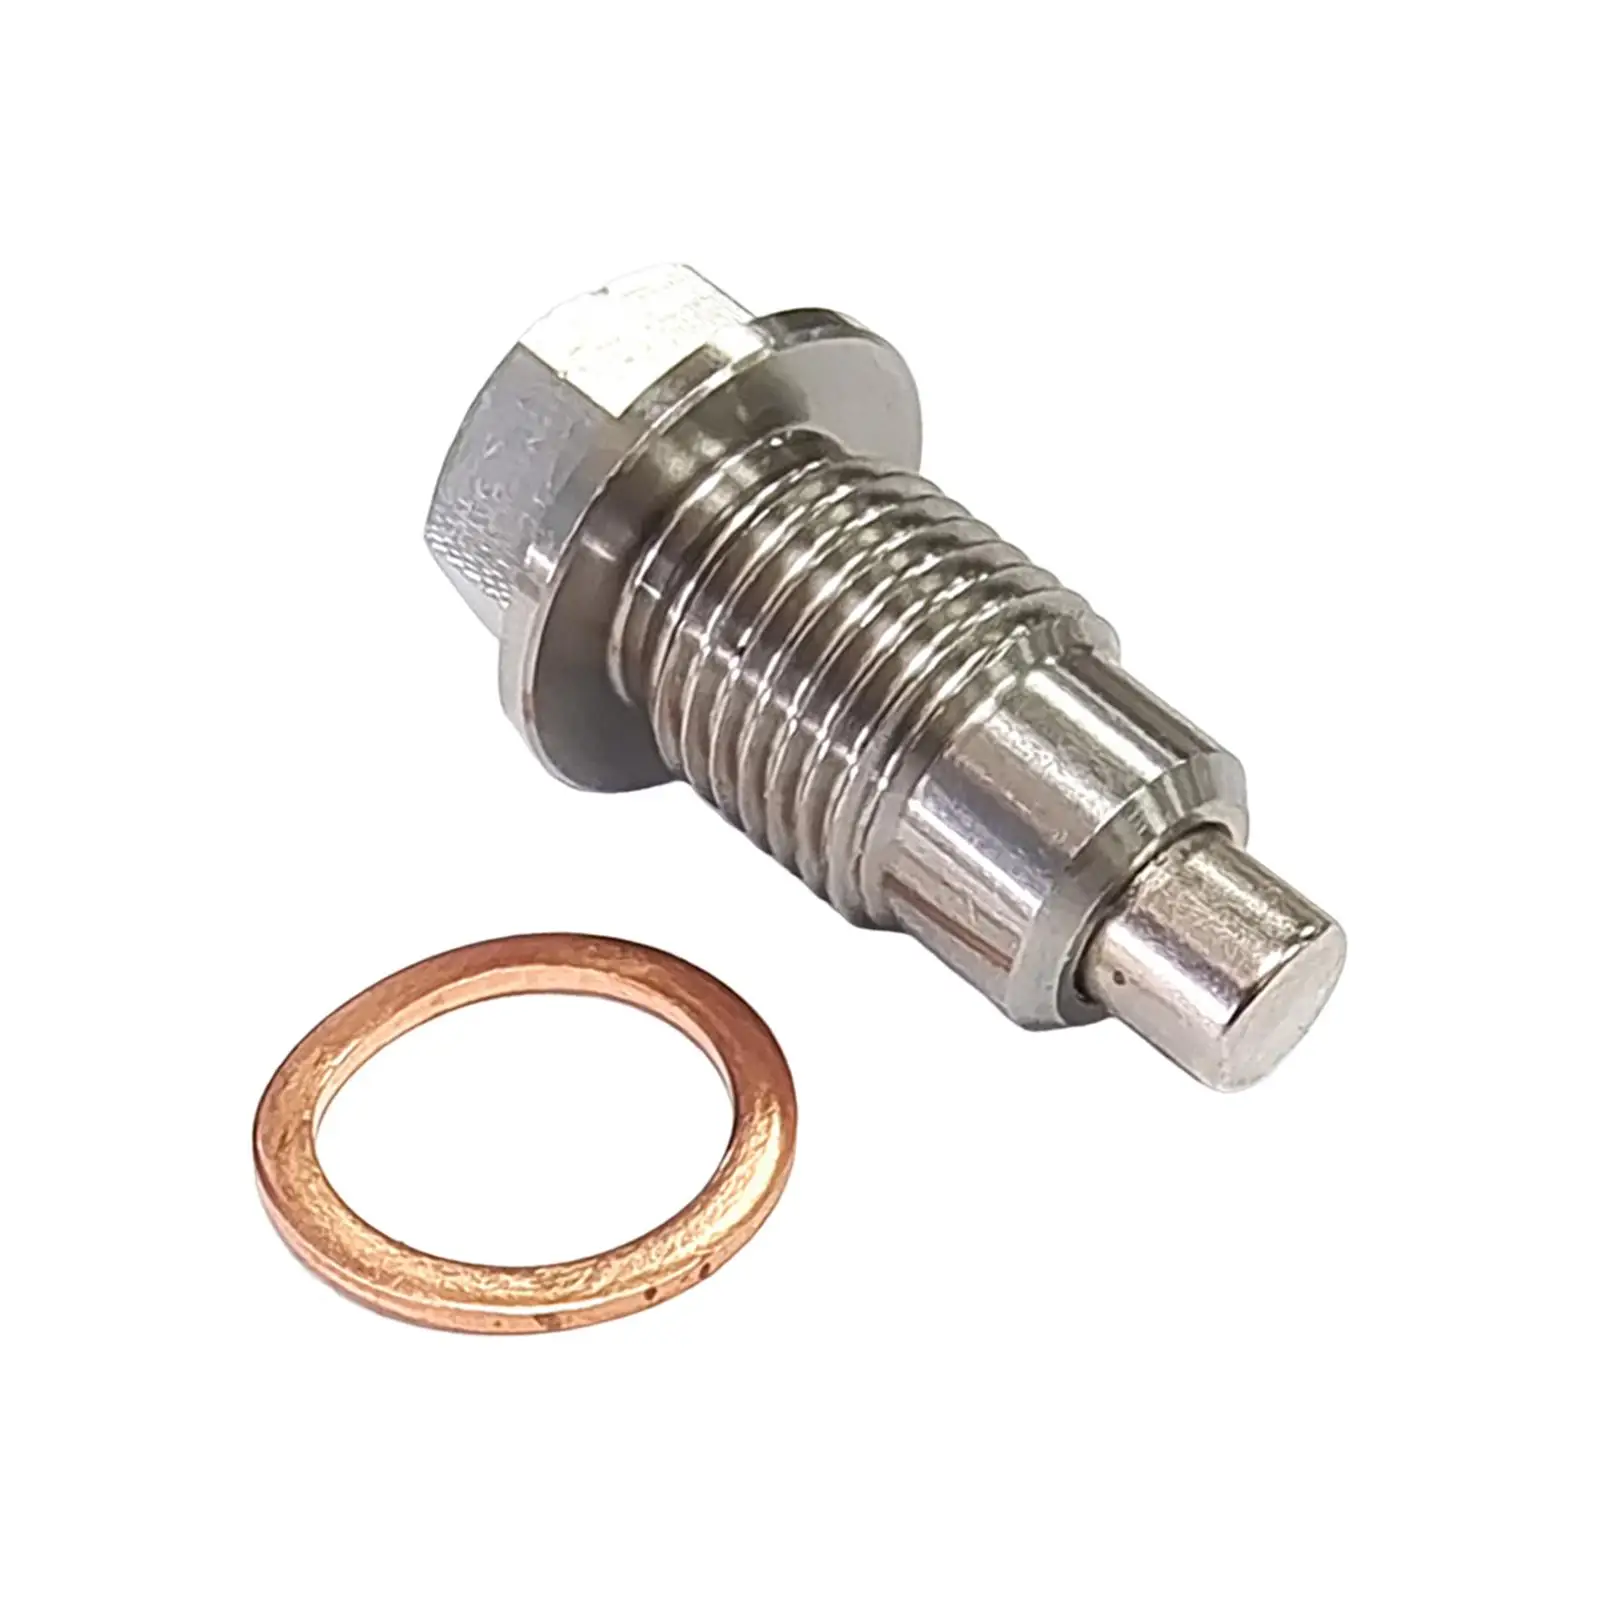 Oil Drain Plug Screw M12x1.25 with Cooper Washer Install Faster Replace